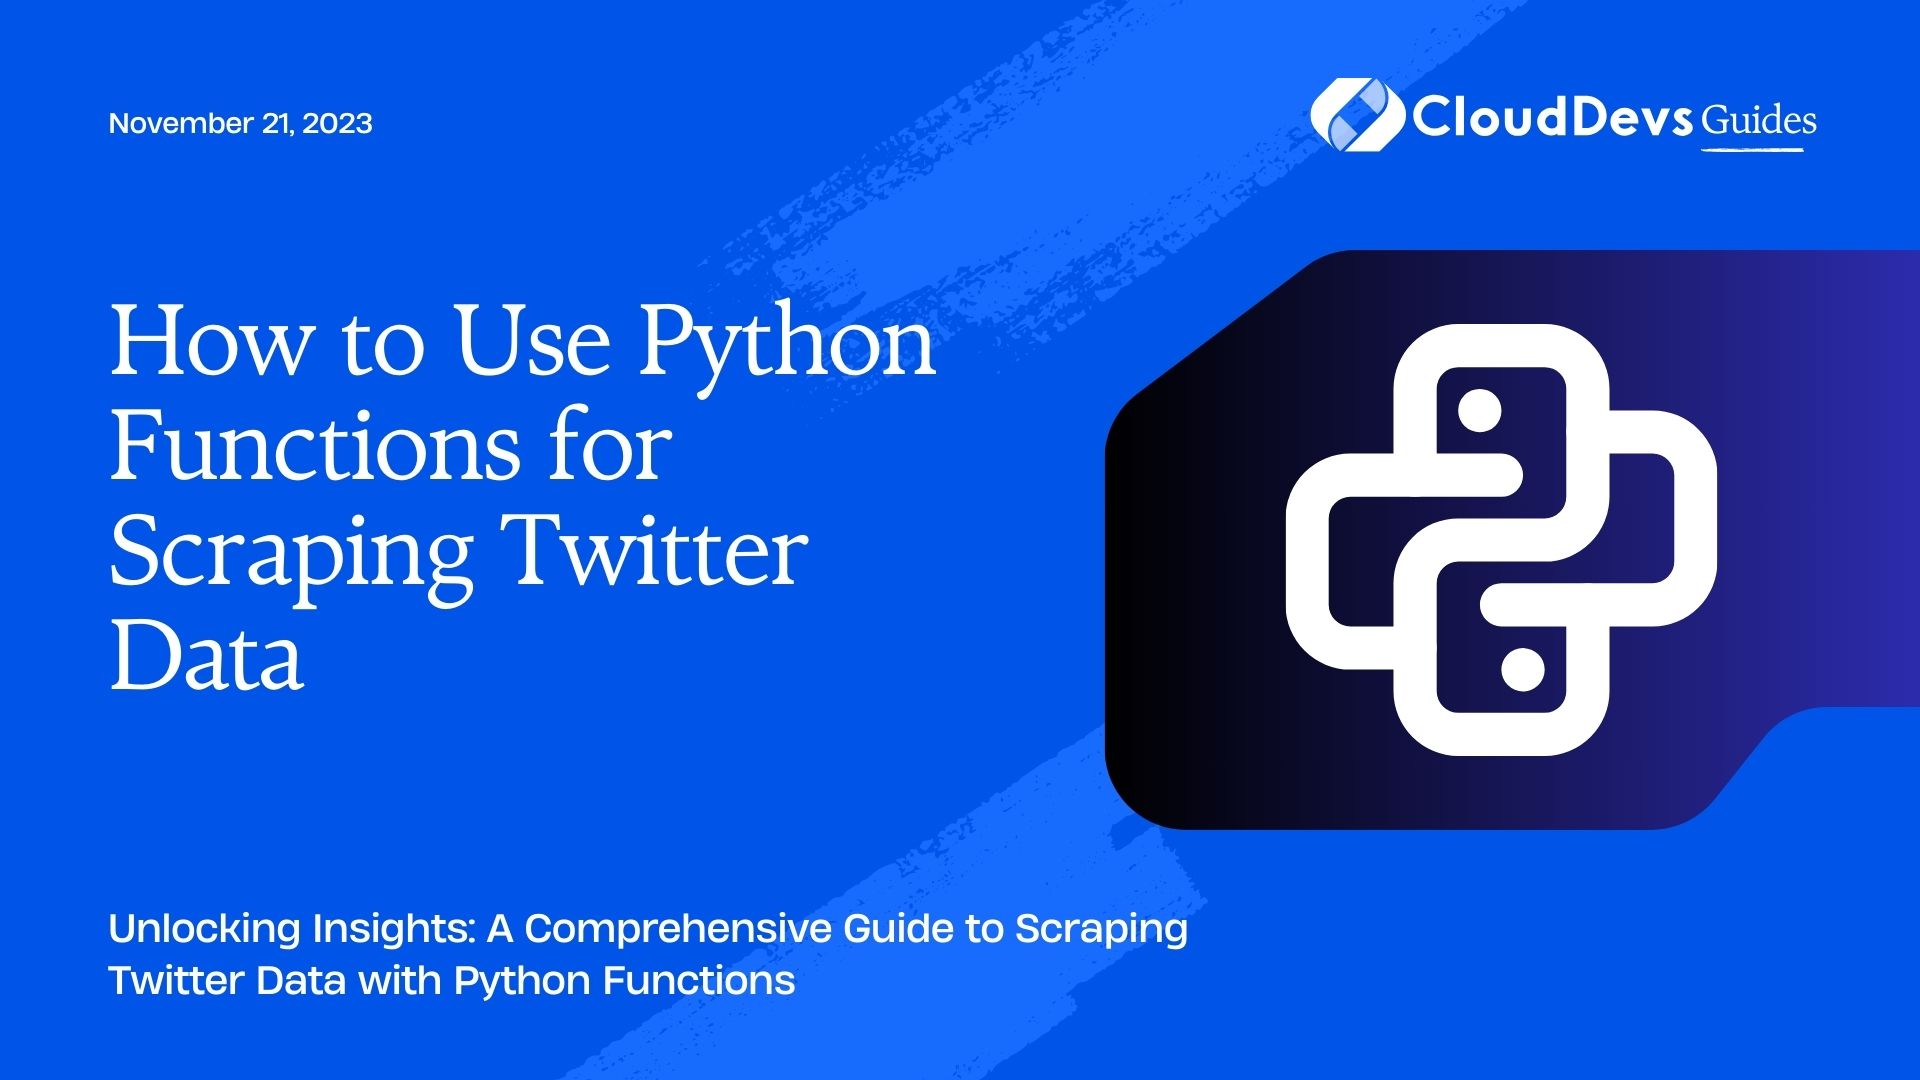 How to Use Python Functions for Scraping Twitter Data